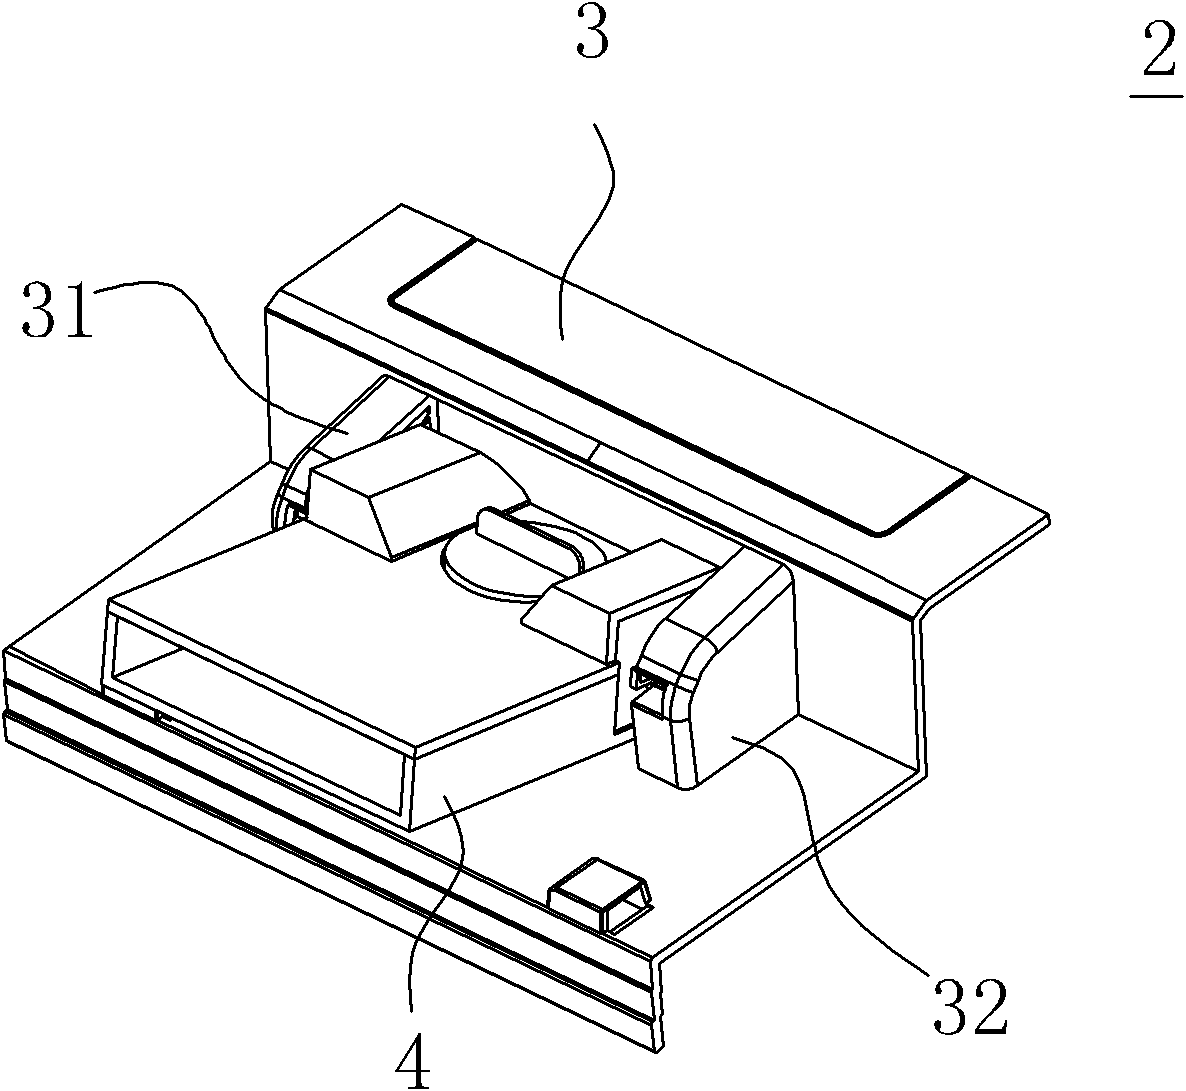 Support device